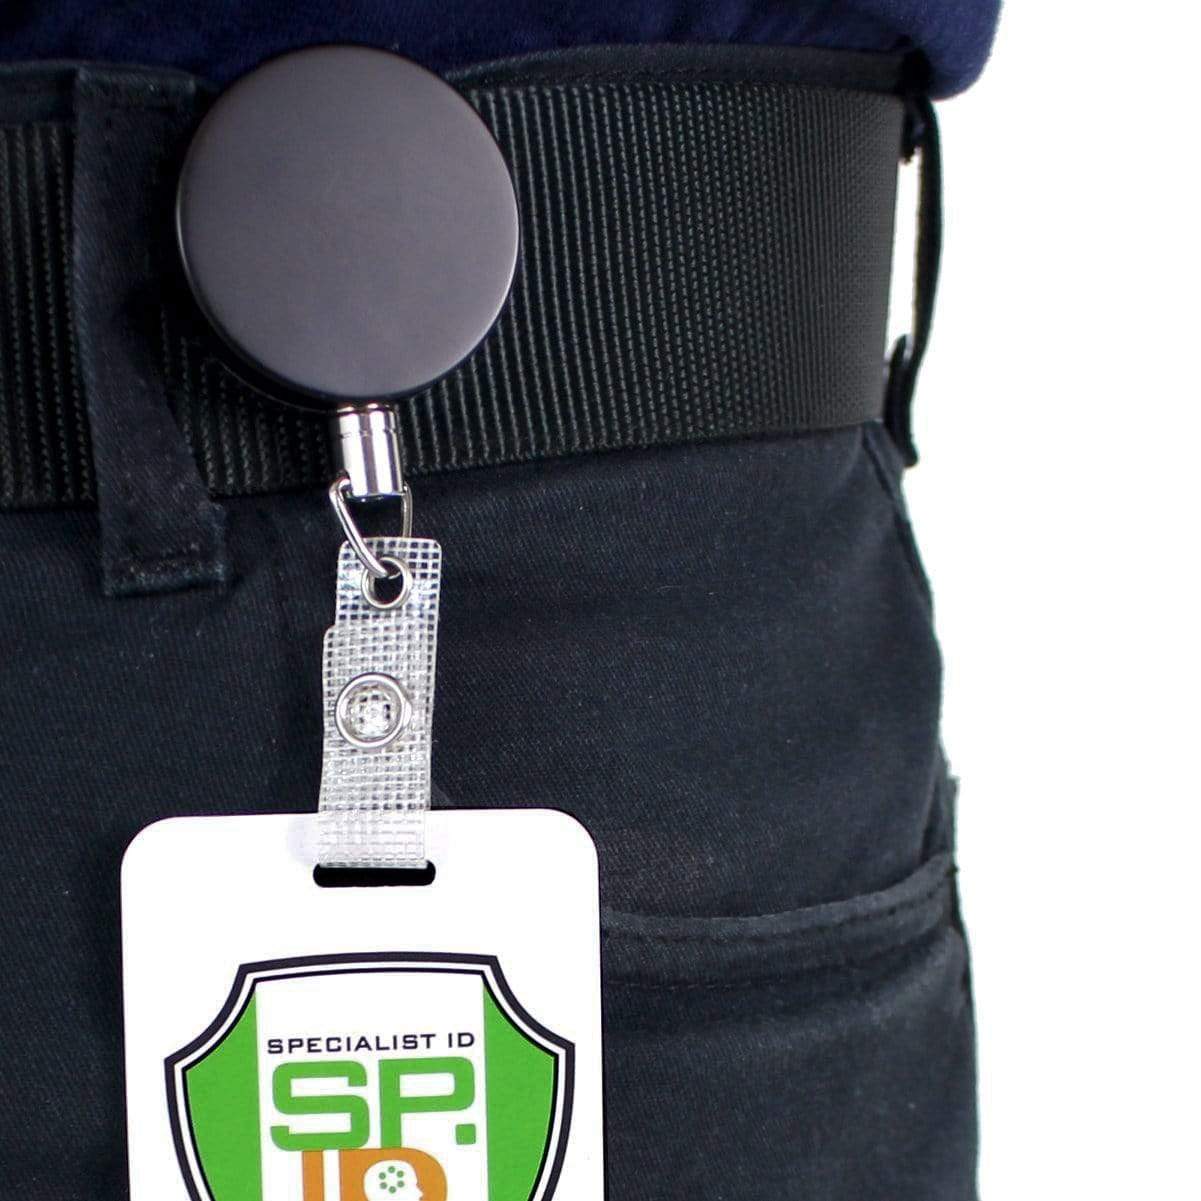 A black, heavy-duty badge reel with a badge clipped onto a black belt. The retractable chain holds the Heavy Duty Badge Reel With Chain (P/N 2120-3375), which features a green, orange, and white design.